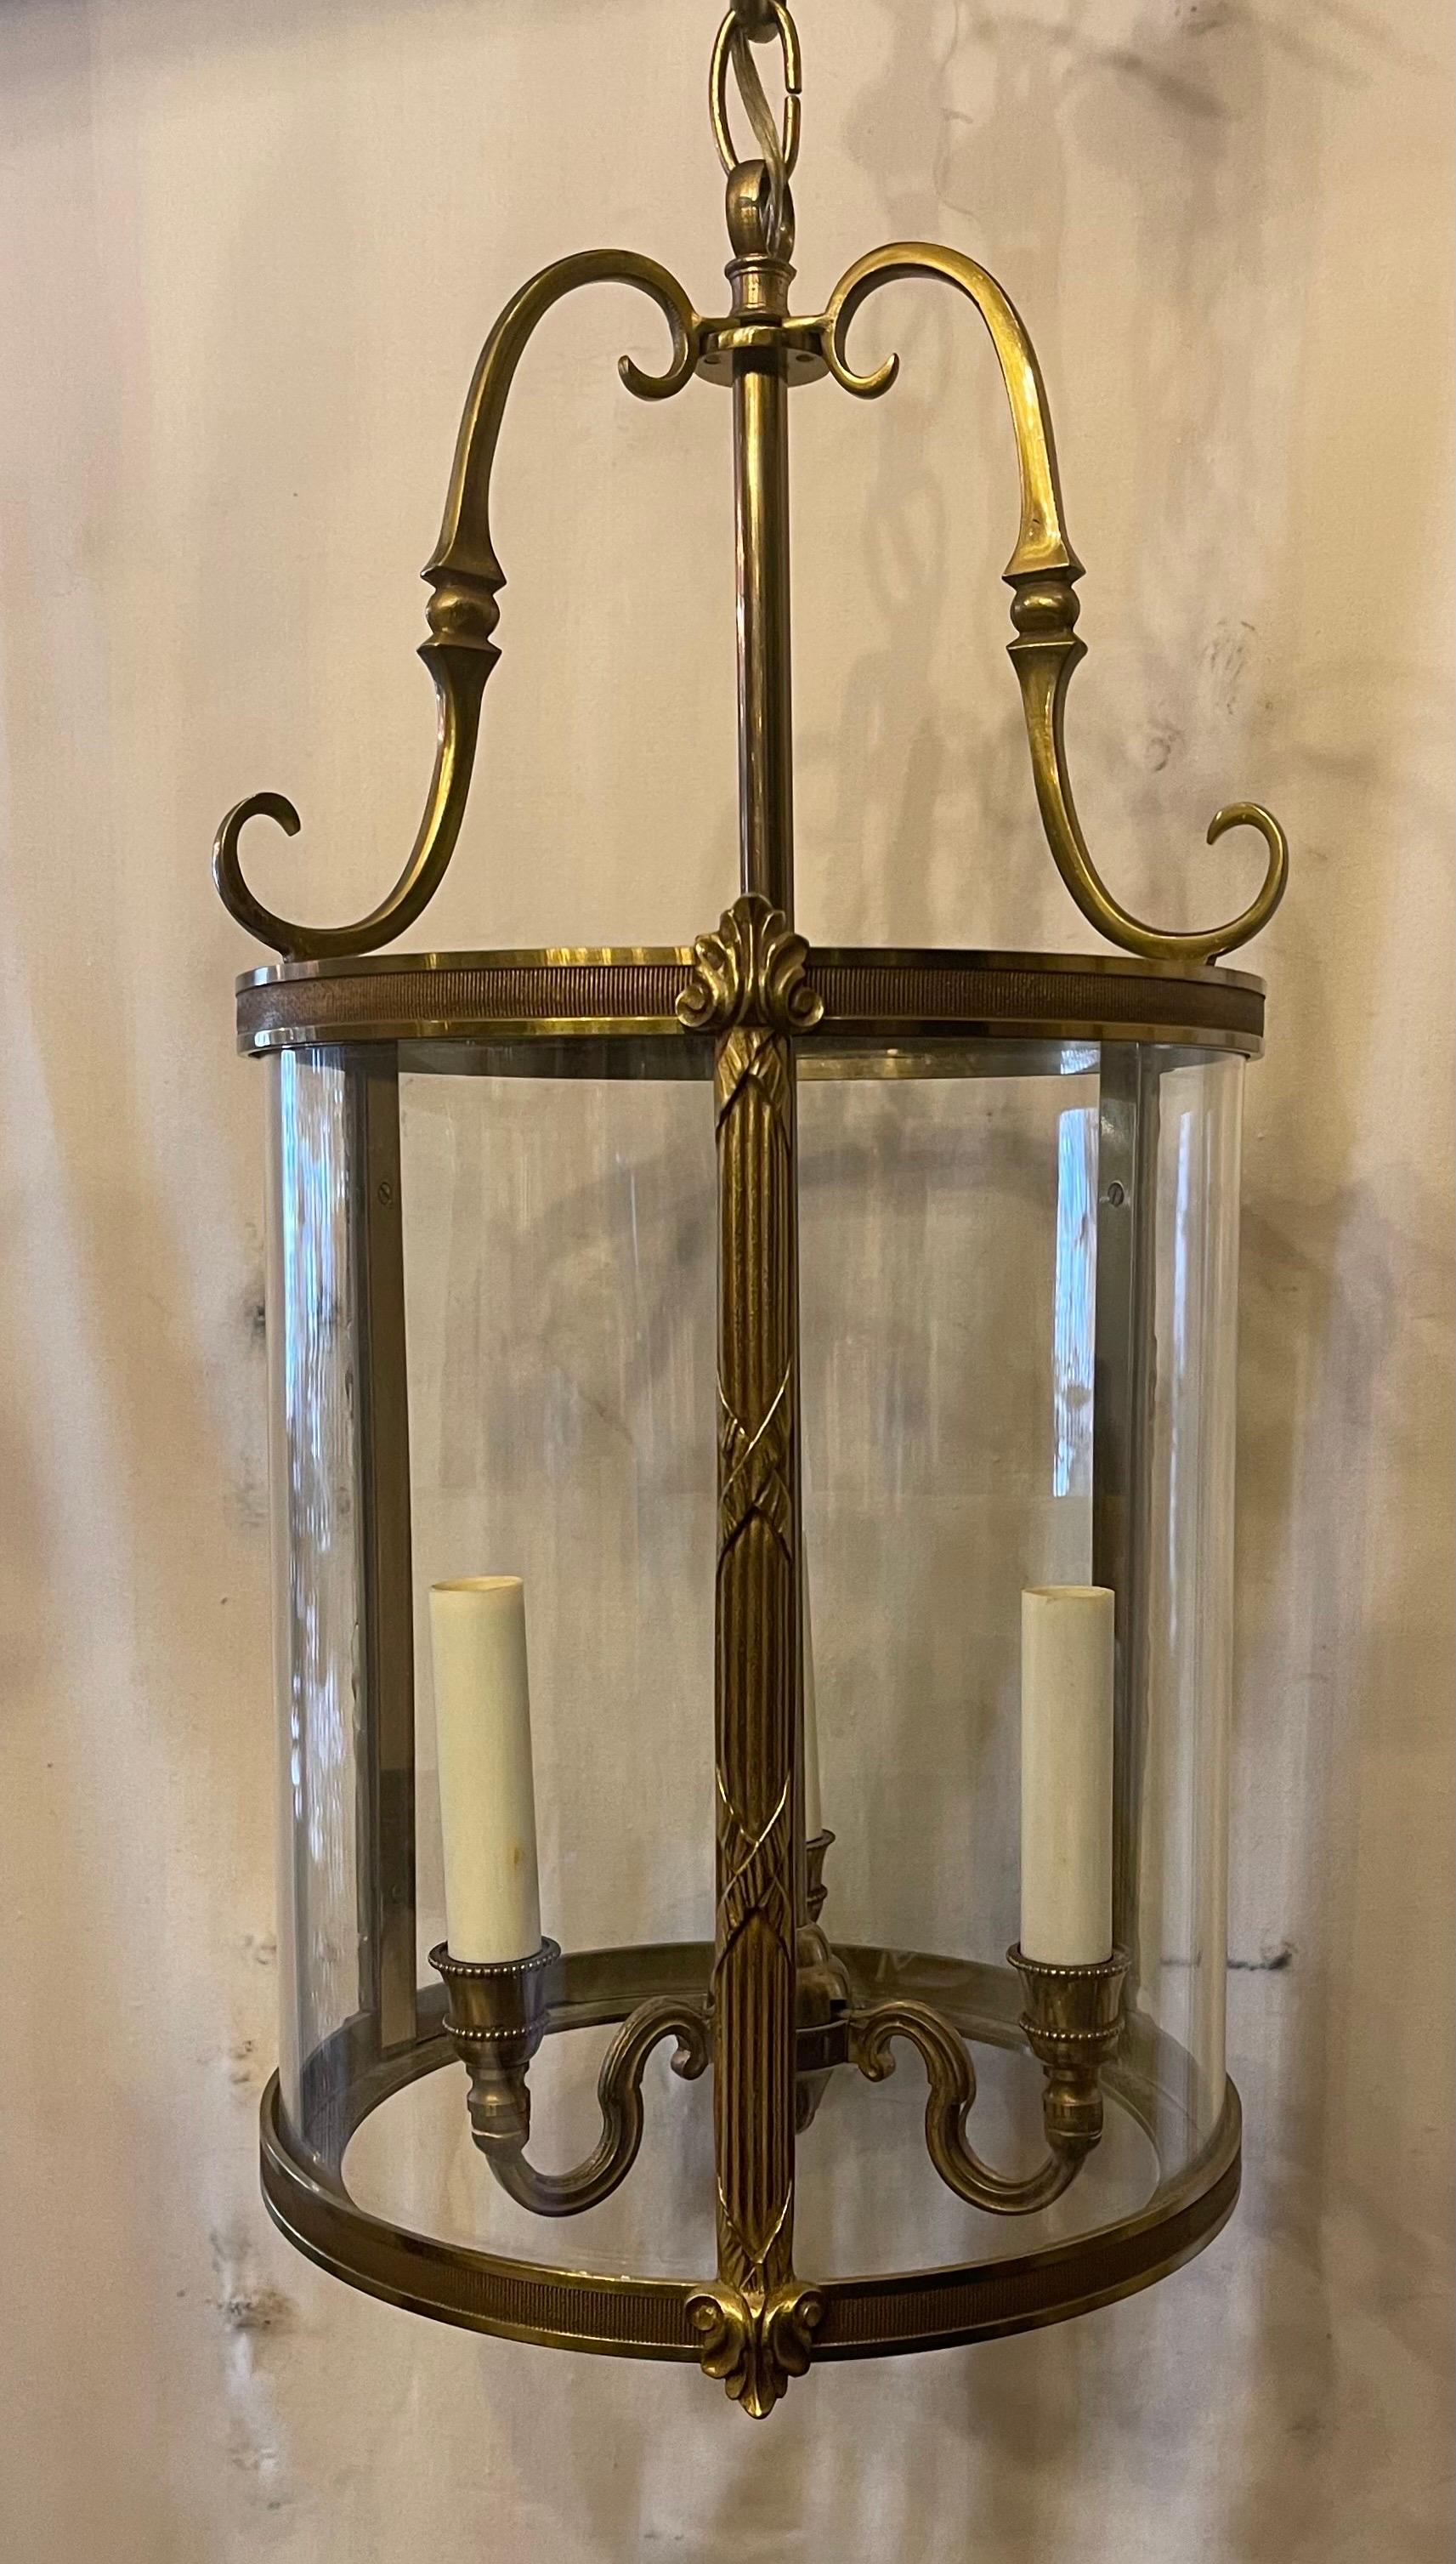 A wonderful French bronze readed x-pattern curved glass lantern neoclassical fixture having three candelabra lights inside, accompanied by chain canopy and mounting hardware.